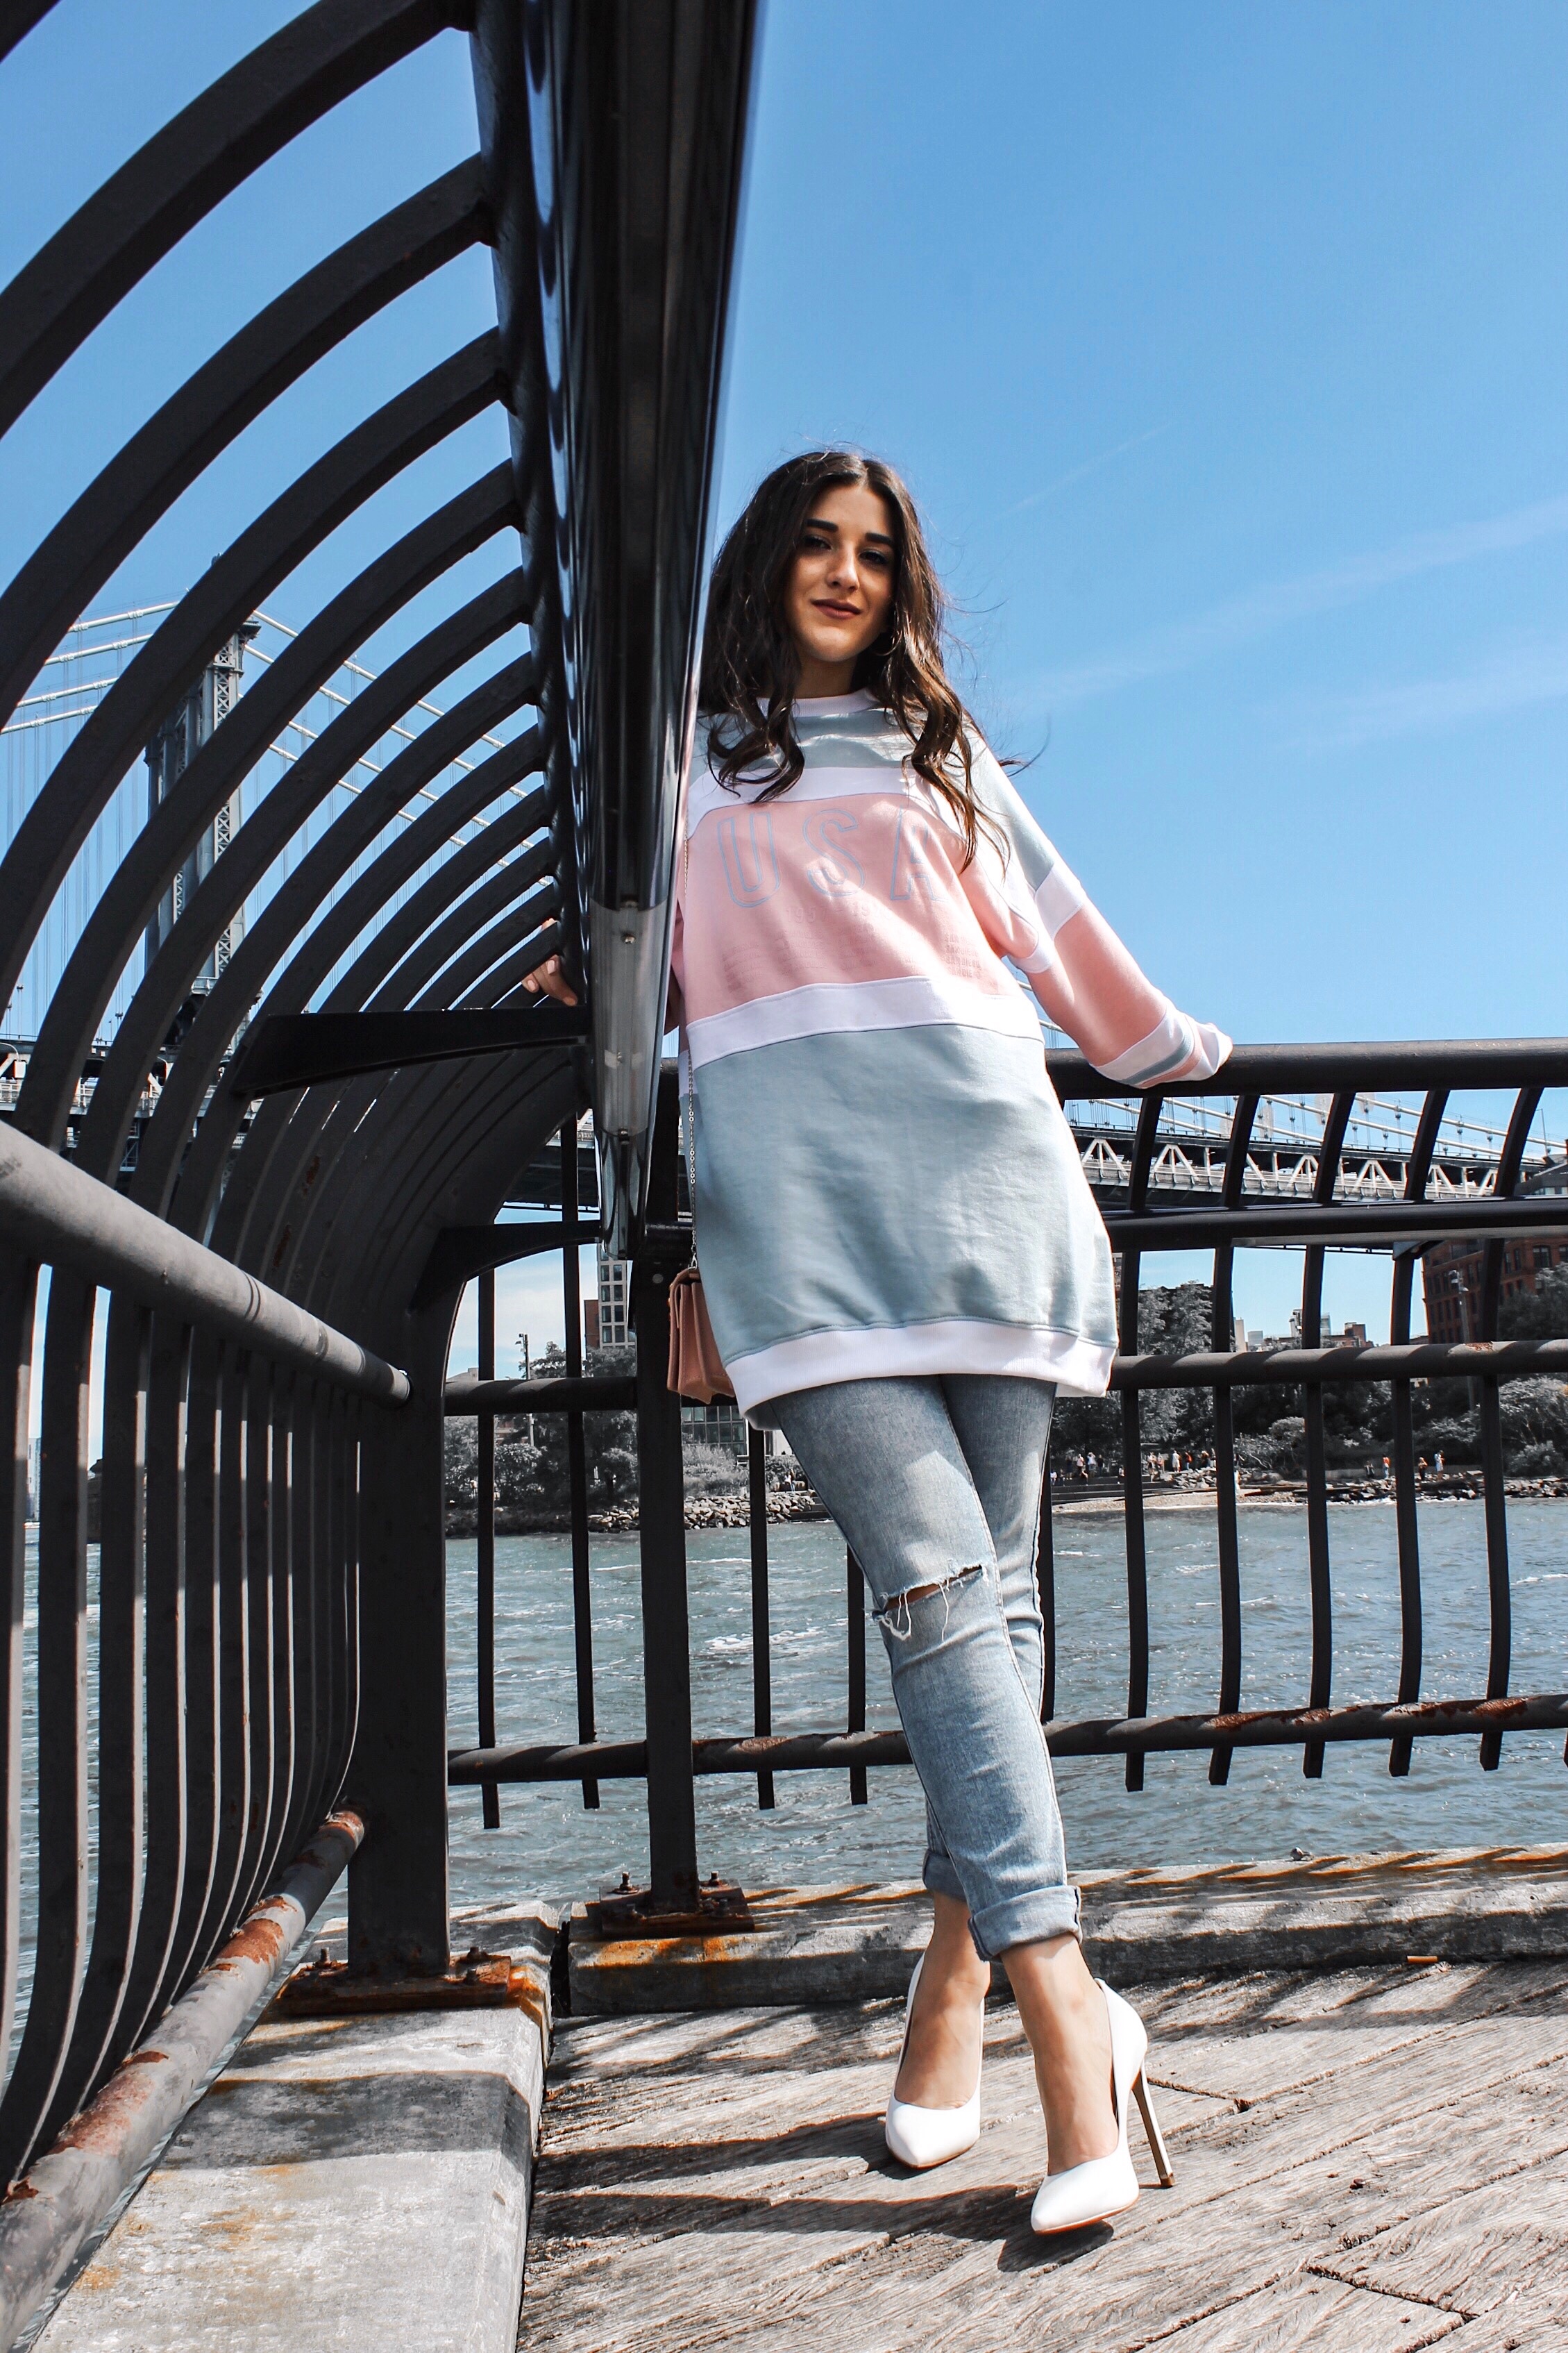 How To Style Kenneth Cole's White Riley Heels Esther Santer Fashion Blog NYC Street Style Blogger Outfit OOTD Trendy Brand Collaboration Comfortable Casual Wear Jeans Oversized Sweatshirt  Pink Zac Posen Bag Girl Women Dumbo Photoshoot Carousel Bridge.jpg